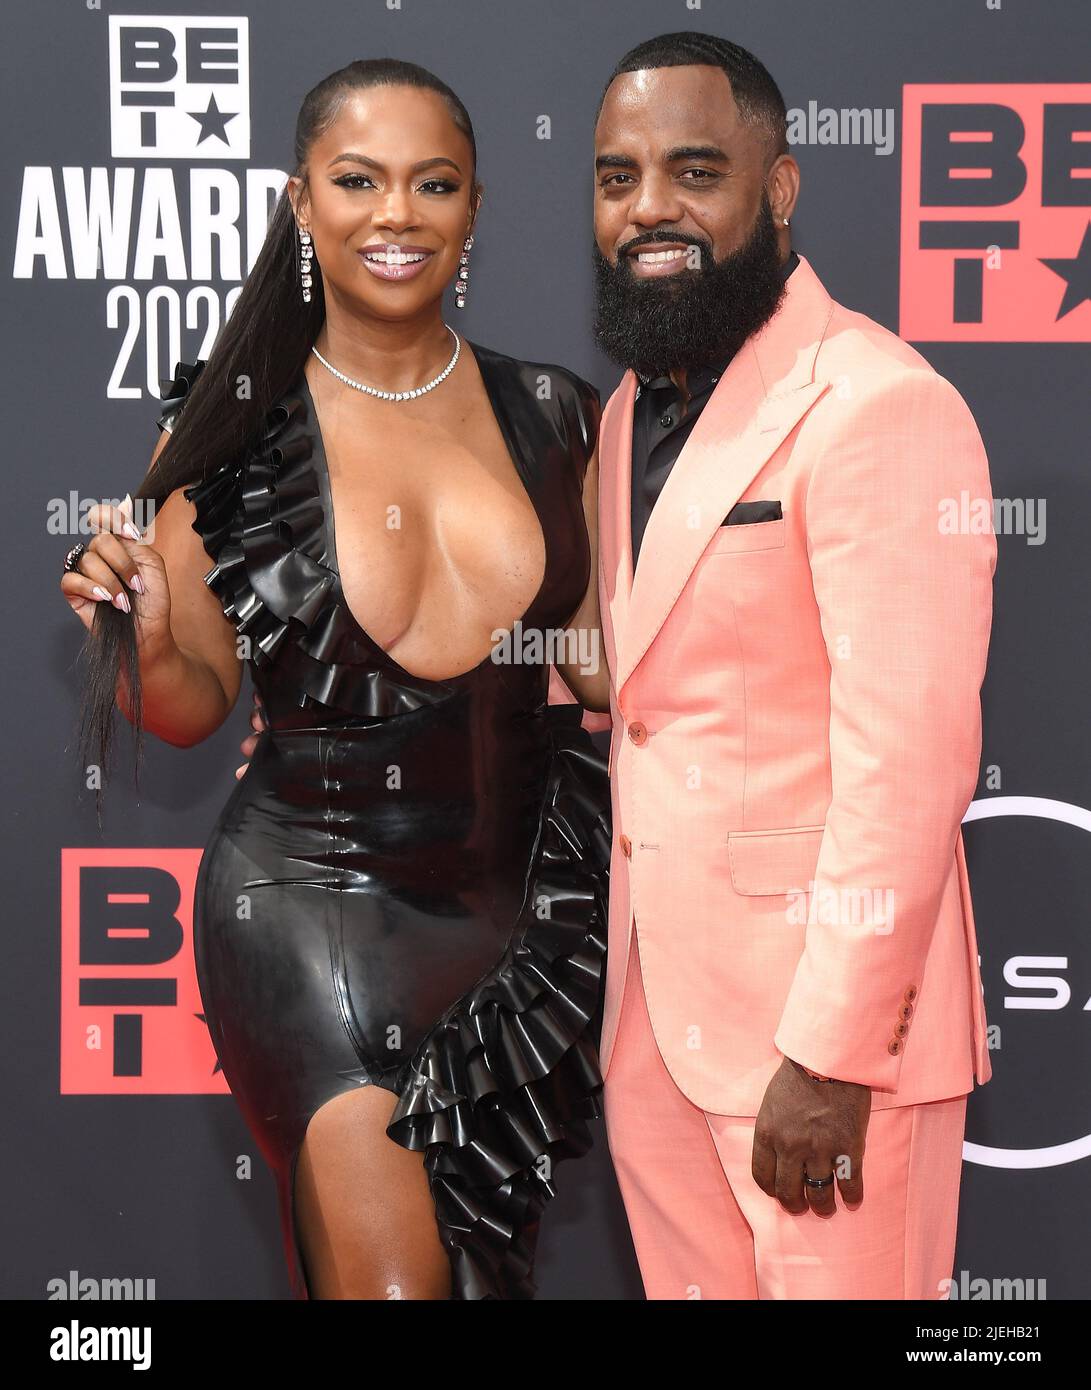 Los Angeles, USA. 26th June, 2022. (L-R) Kandi Burruss and Todd Tucker arrives at the BET Awards 2022 held at the Microsoft Theater in Los Angeles, CA on Sunday, ?June 26, 2022. (Photo By Sthanlee B. Mirador/Sipa USA) Credit: Sipa USA/Alamy Live News Stock Photo